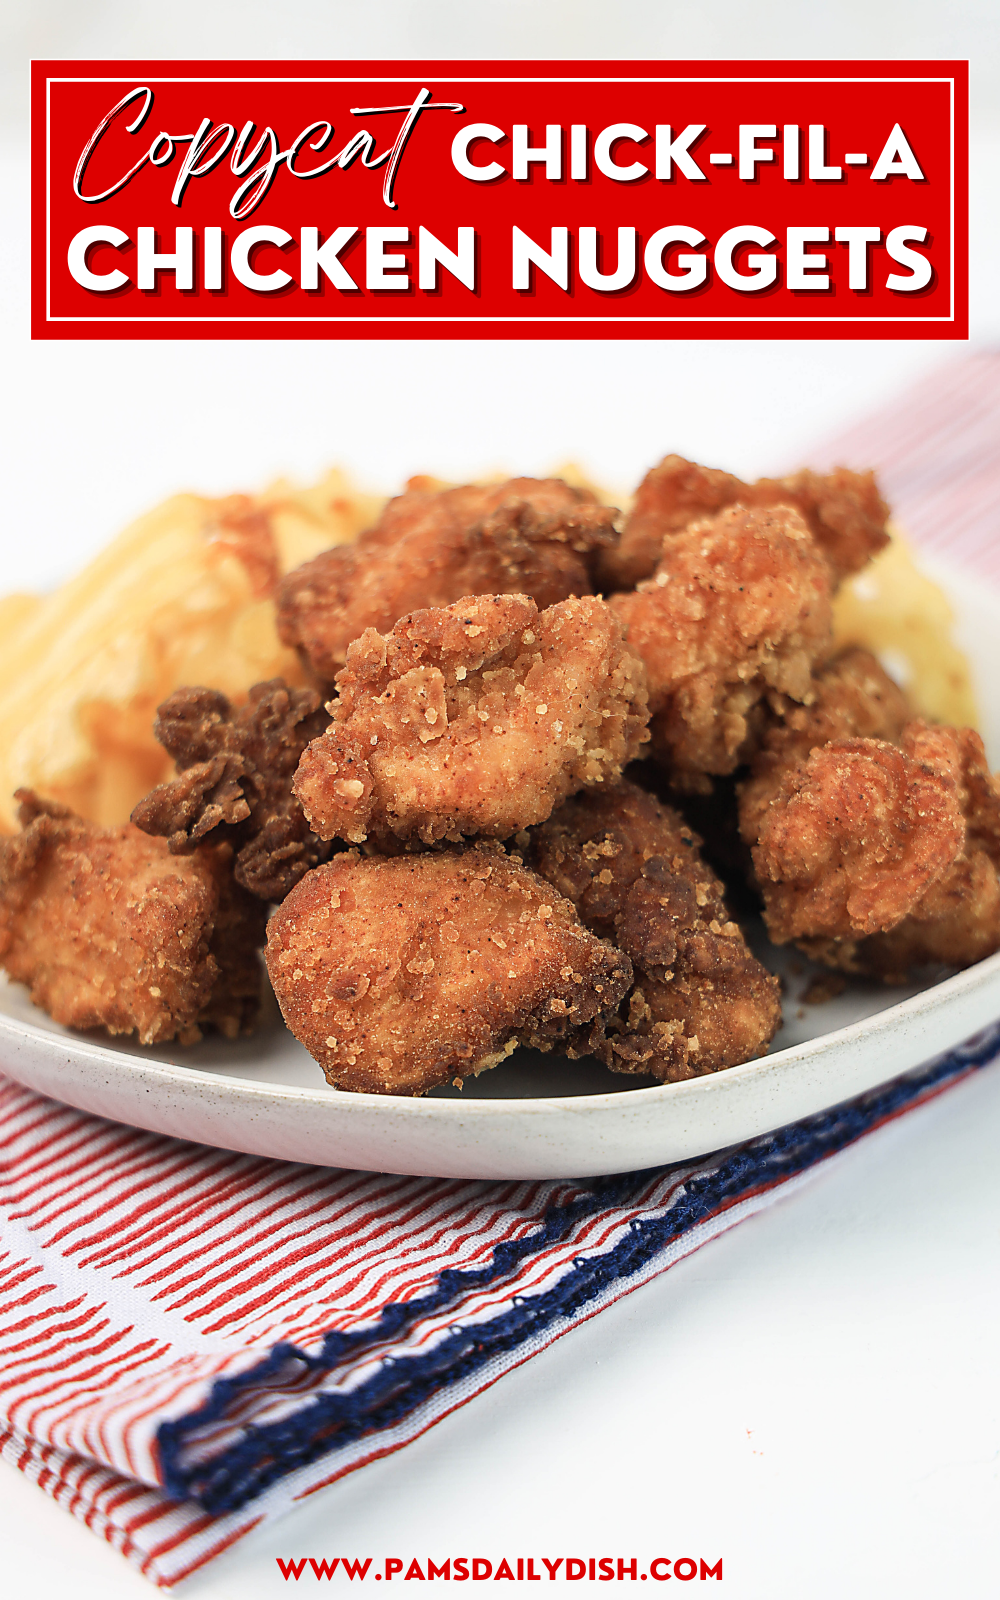 These Copycat Chick-Fil-A Chicken Nuggets are everything you’ve ever loved in the original. Tender, white meat chicken is coated in a crispy, spicy buttermilk batter and fried to perfection. They’re the perfect meal for any chicken lover, and they’re so easy to make! Try this recipe for an amazing homemade version of one of my family's favorite fast food restaurant snacks. via @skinnydesserts